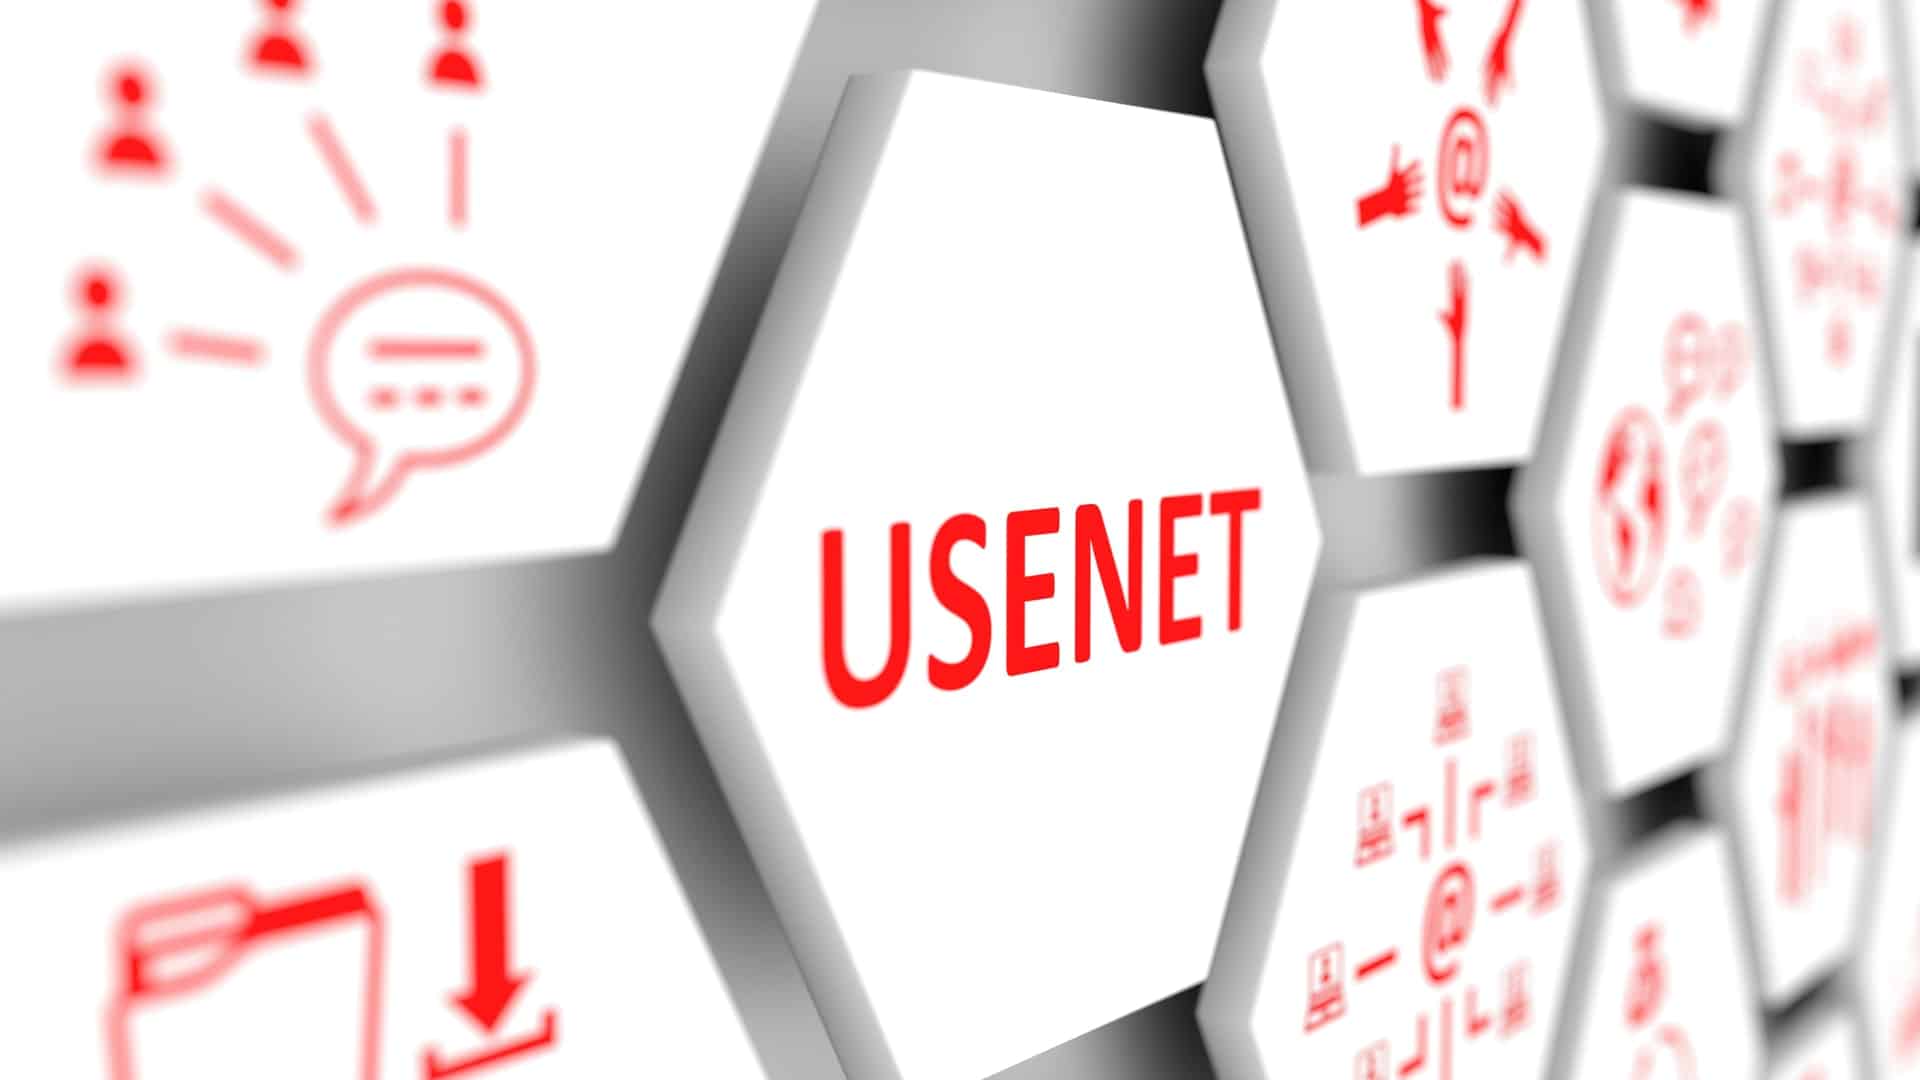 Usenet and losing control online